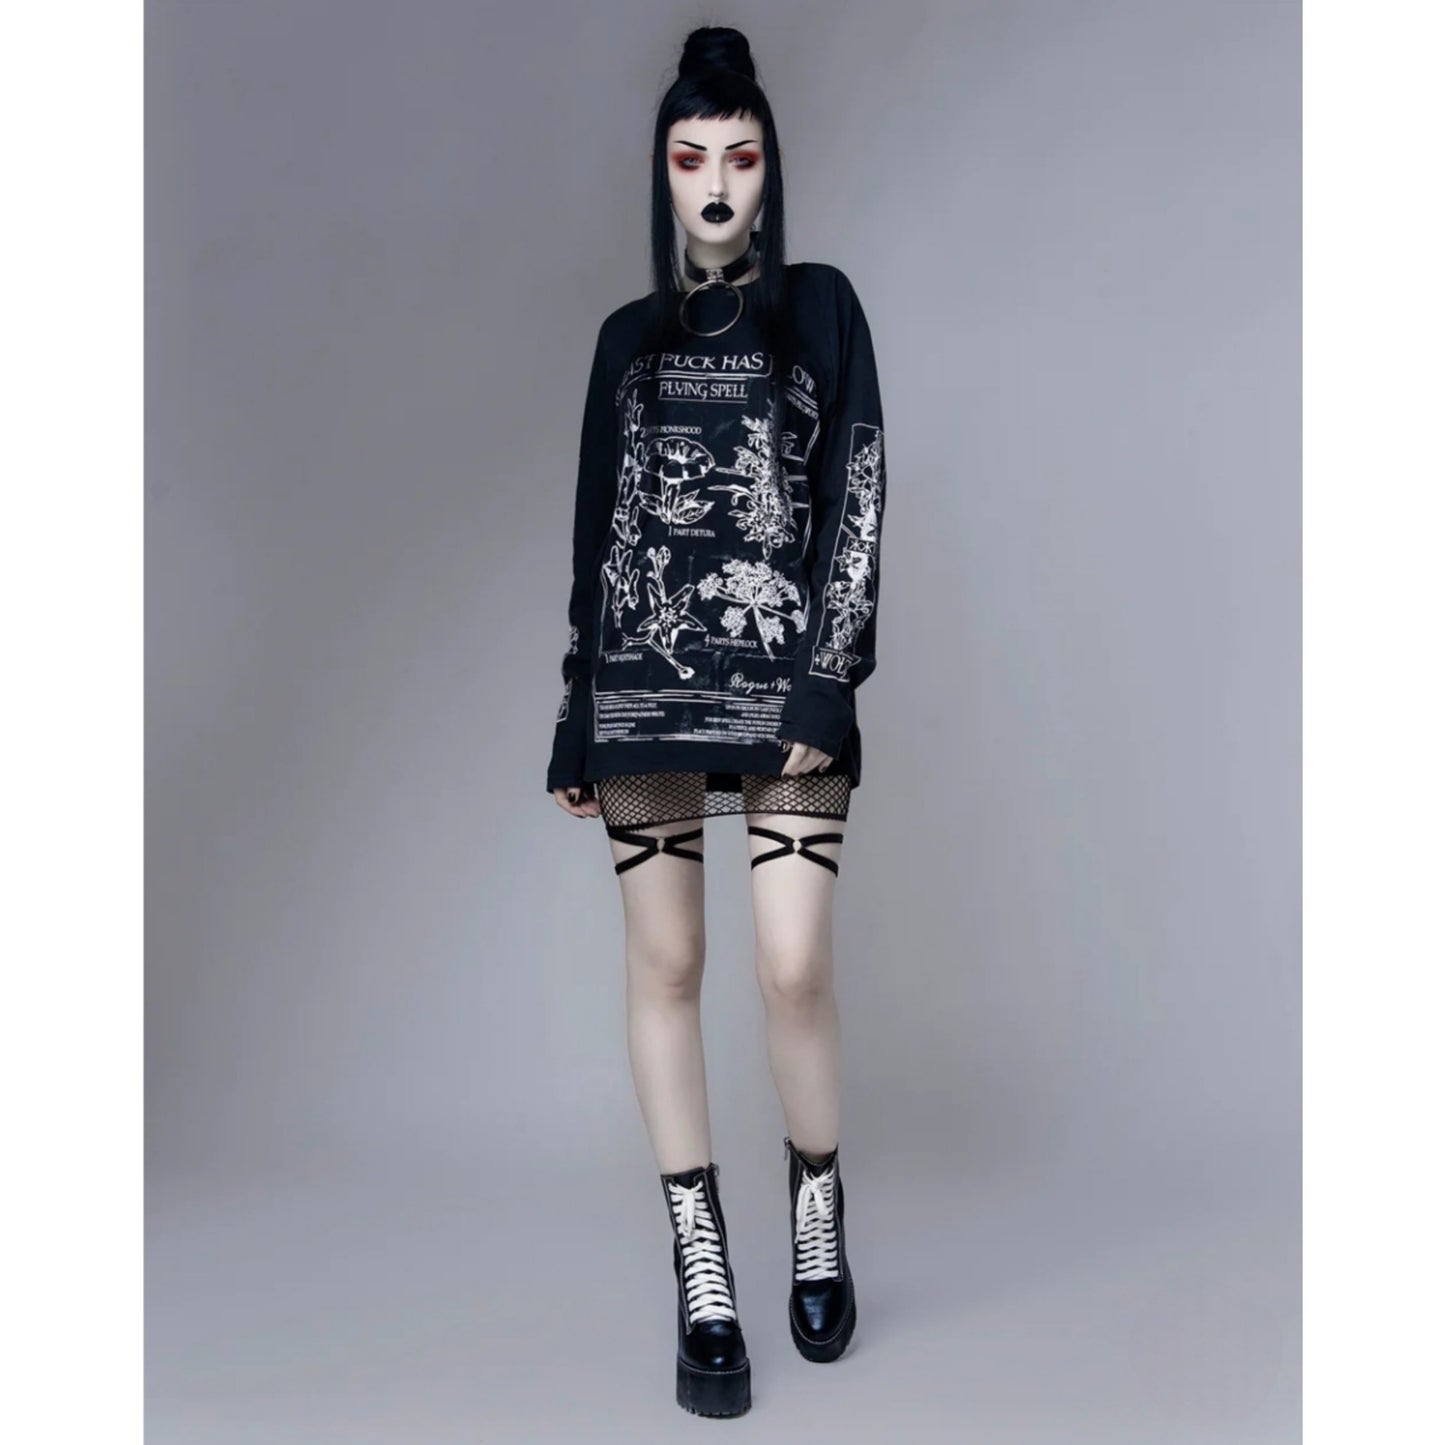 My Last F*ck Has Flown Flying Spell Long Sleeve Tee | Black Cotton - Rogue + Wolf - Shirts